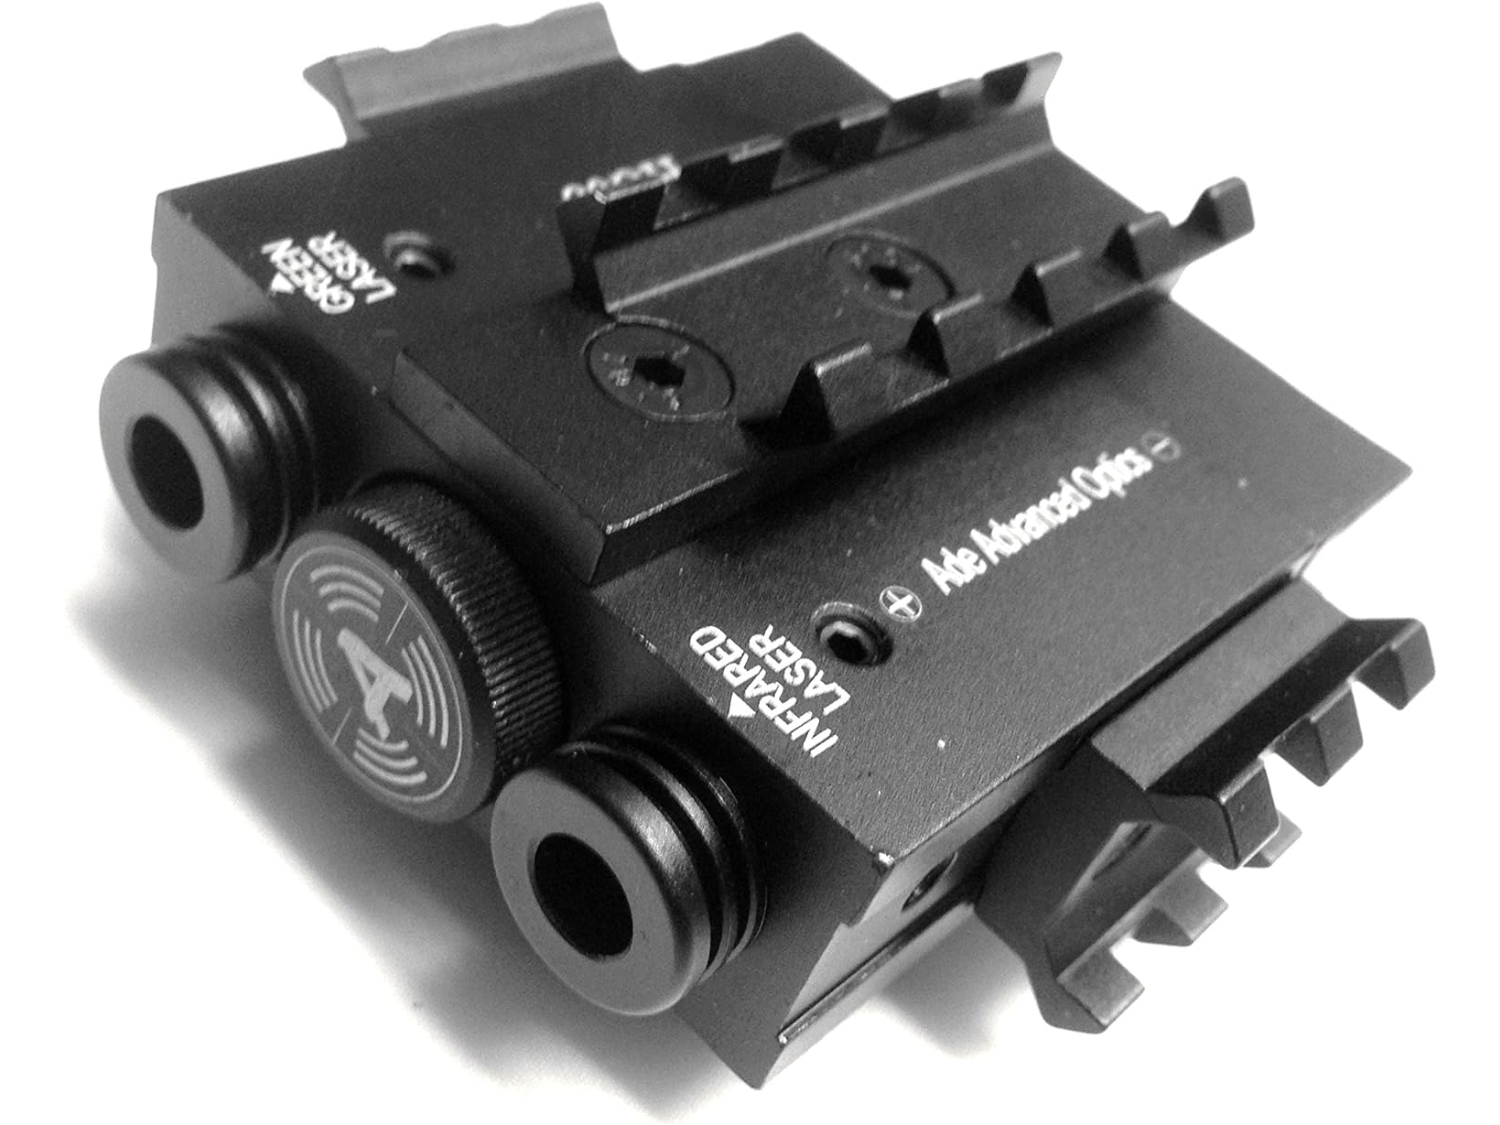 ADE Tactical Green IR Laser Combo Sight for Night Vision